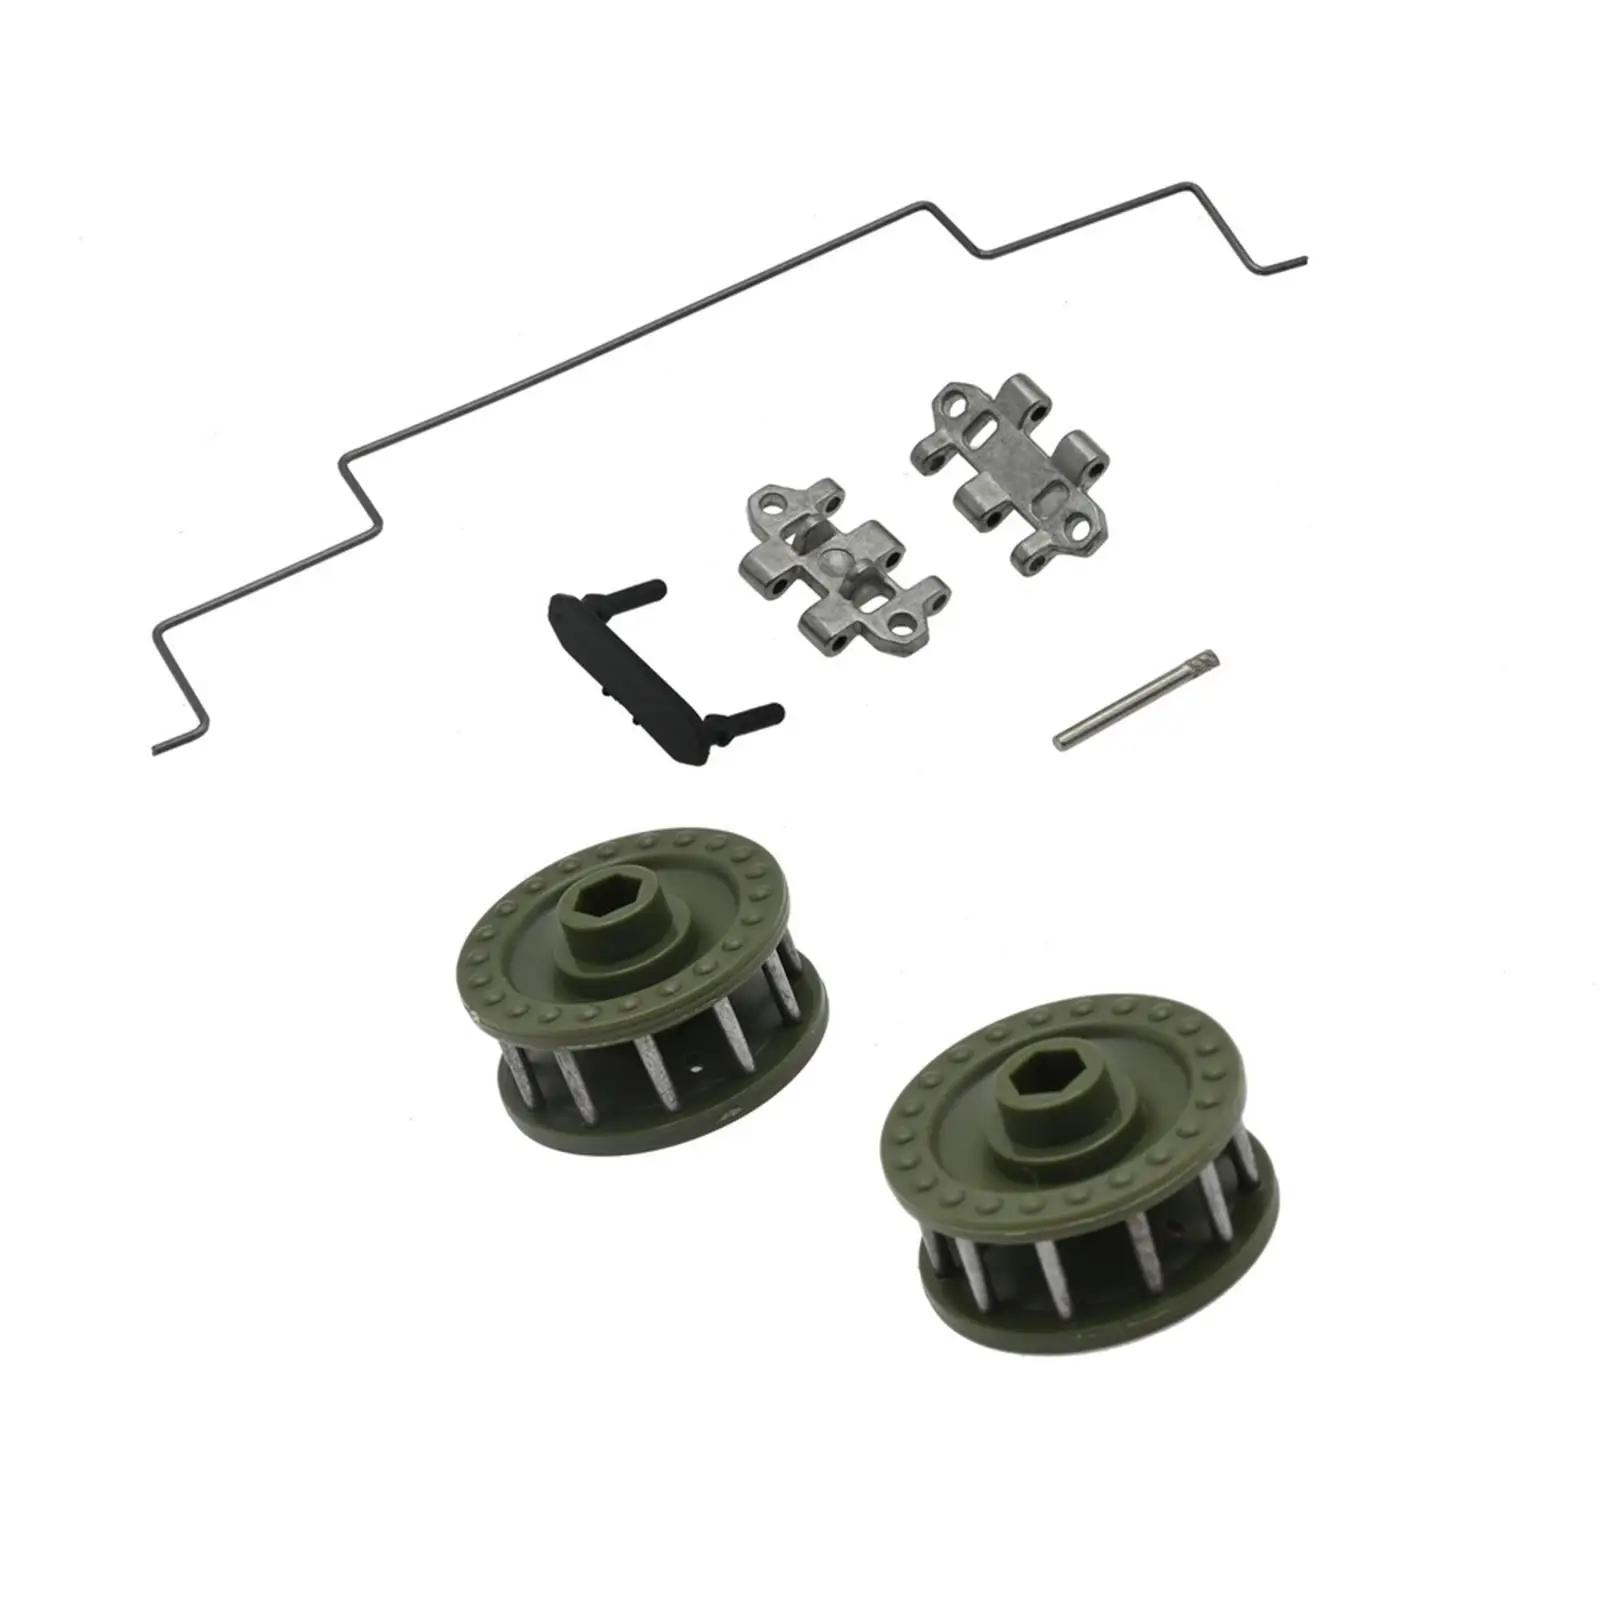 1/16 RC Track Upgrade Parts Replace Parts Accesories RC Tank Toy Accessory for RC Clawler Tracked Vehicle Accessories